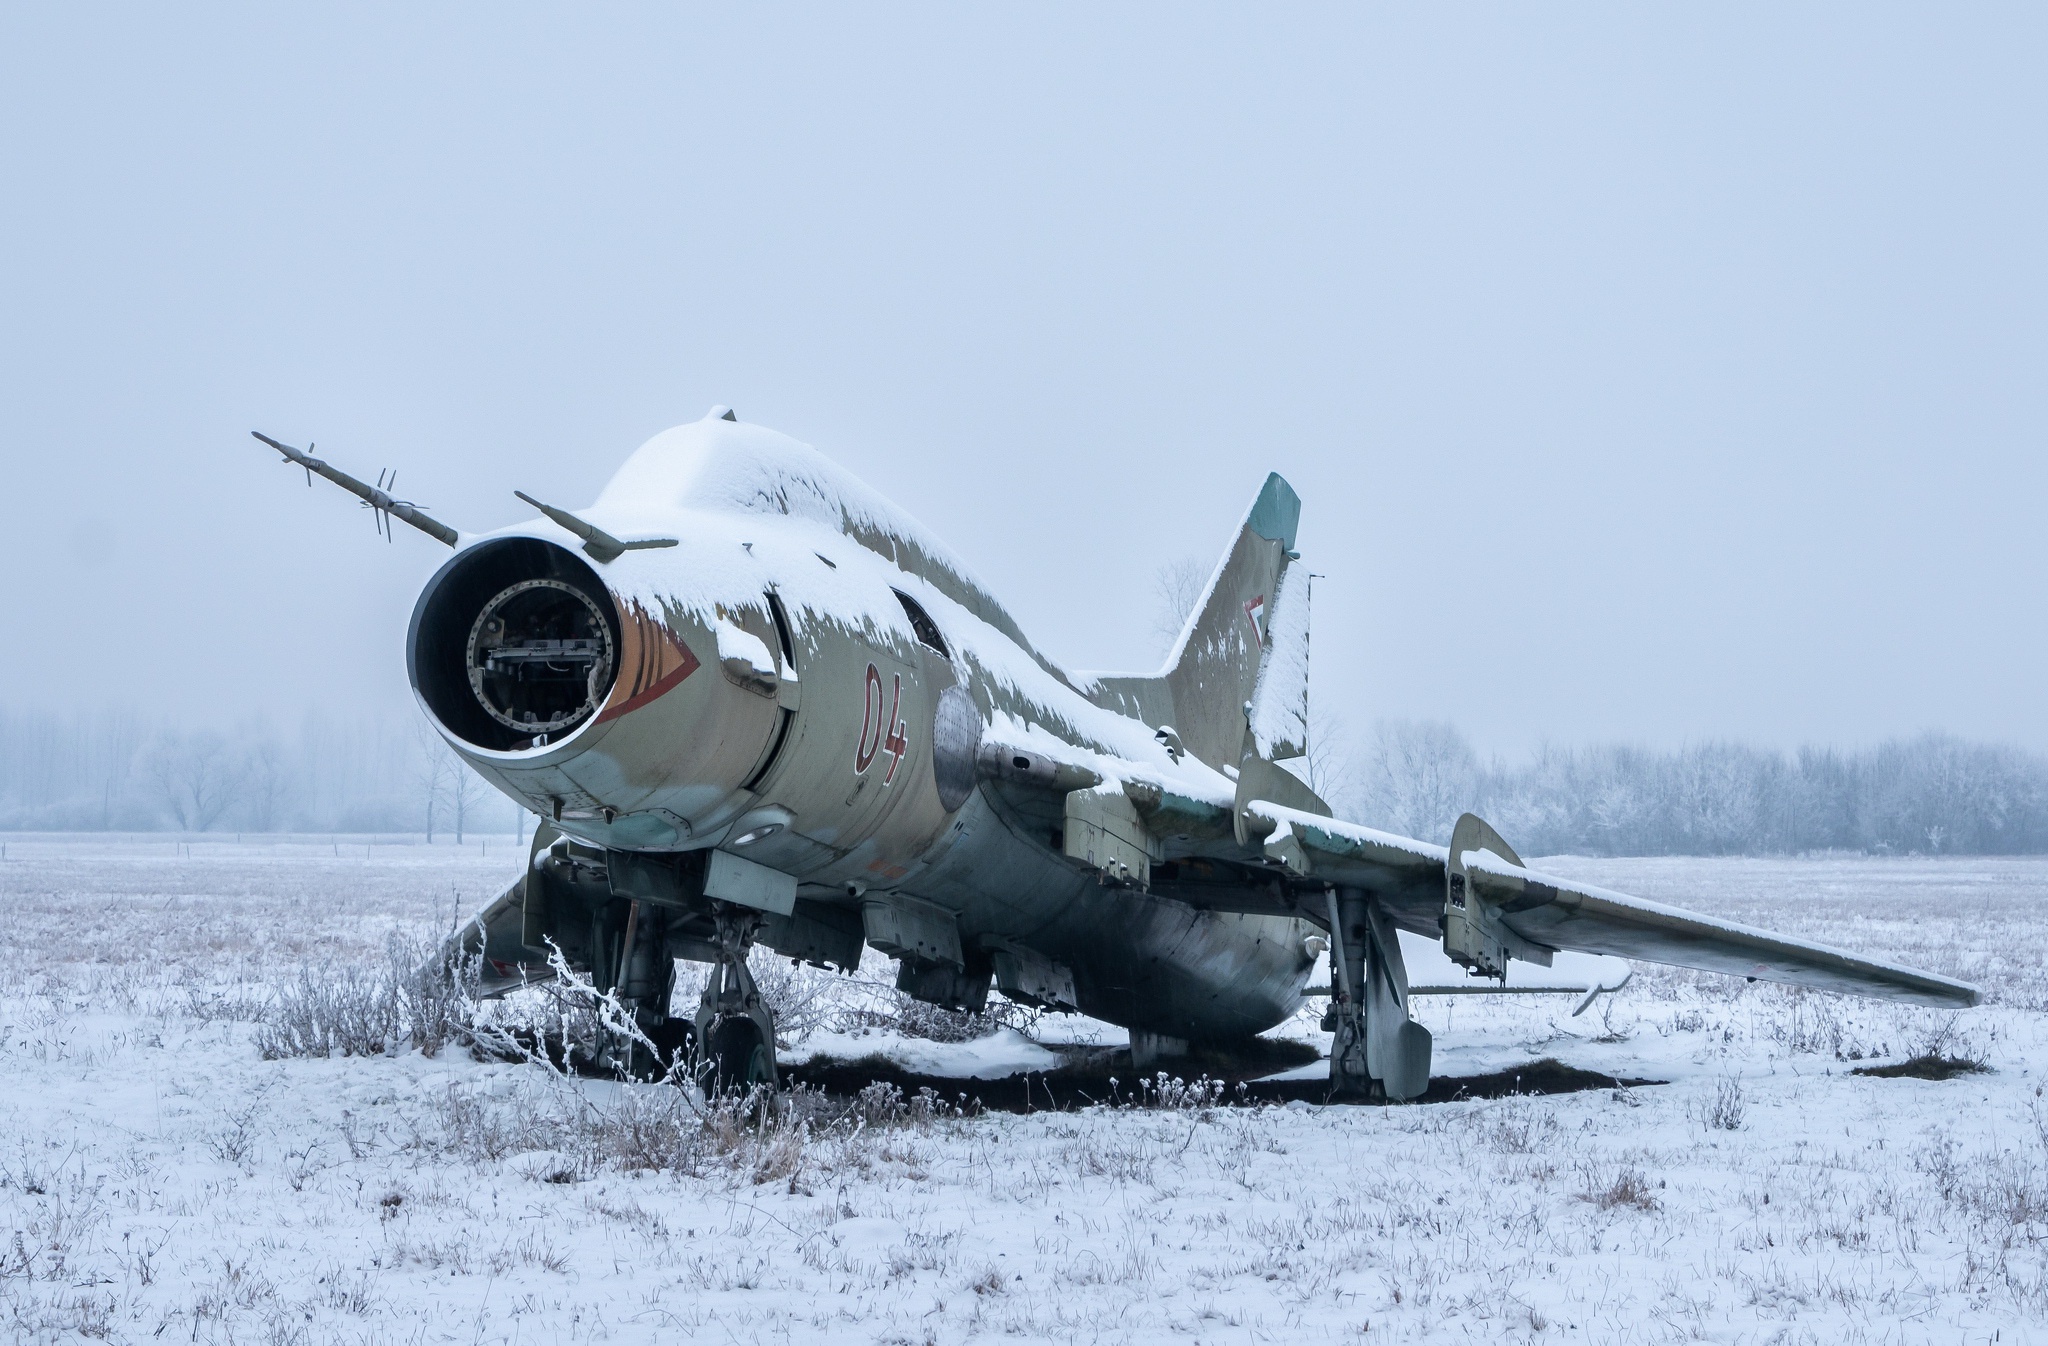 General 2048x1346 snow military aircraft aircraft military vehicle Sukhoi snow covered frontal view Russian/Soviet aircraft winter